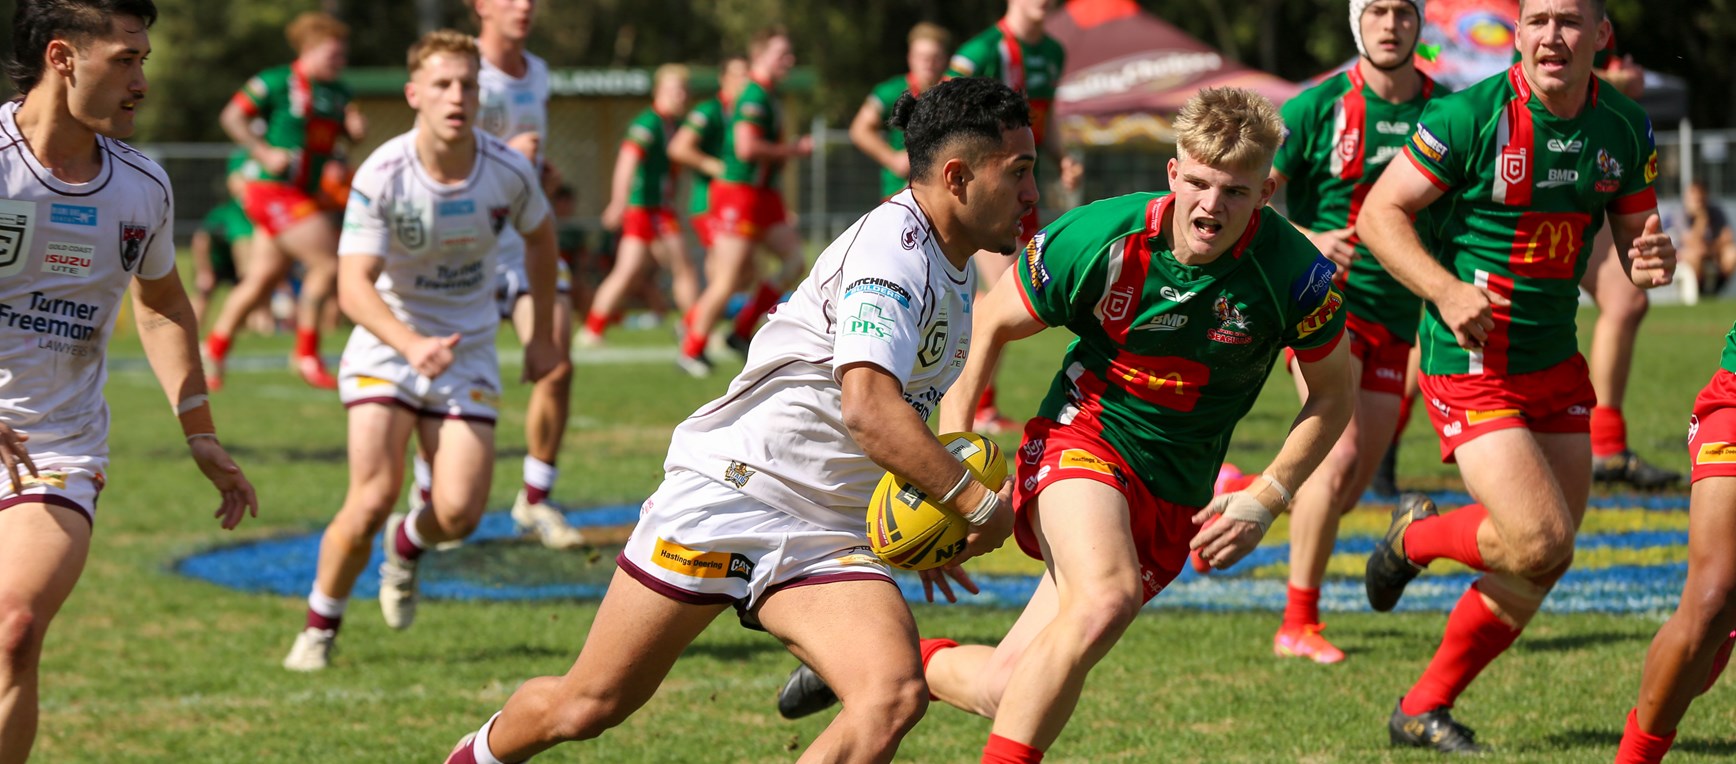 In pictures: Round 10 Hastings Deering Colts action